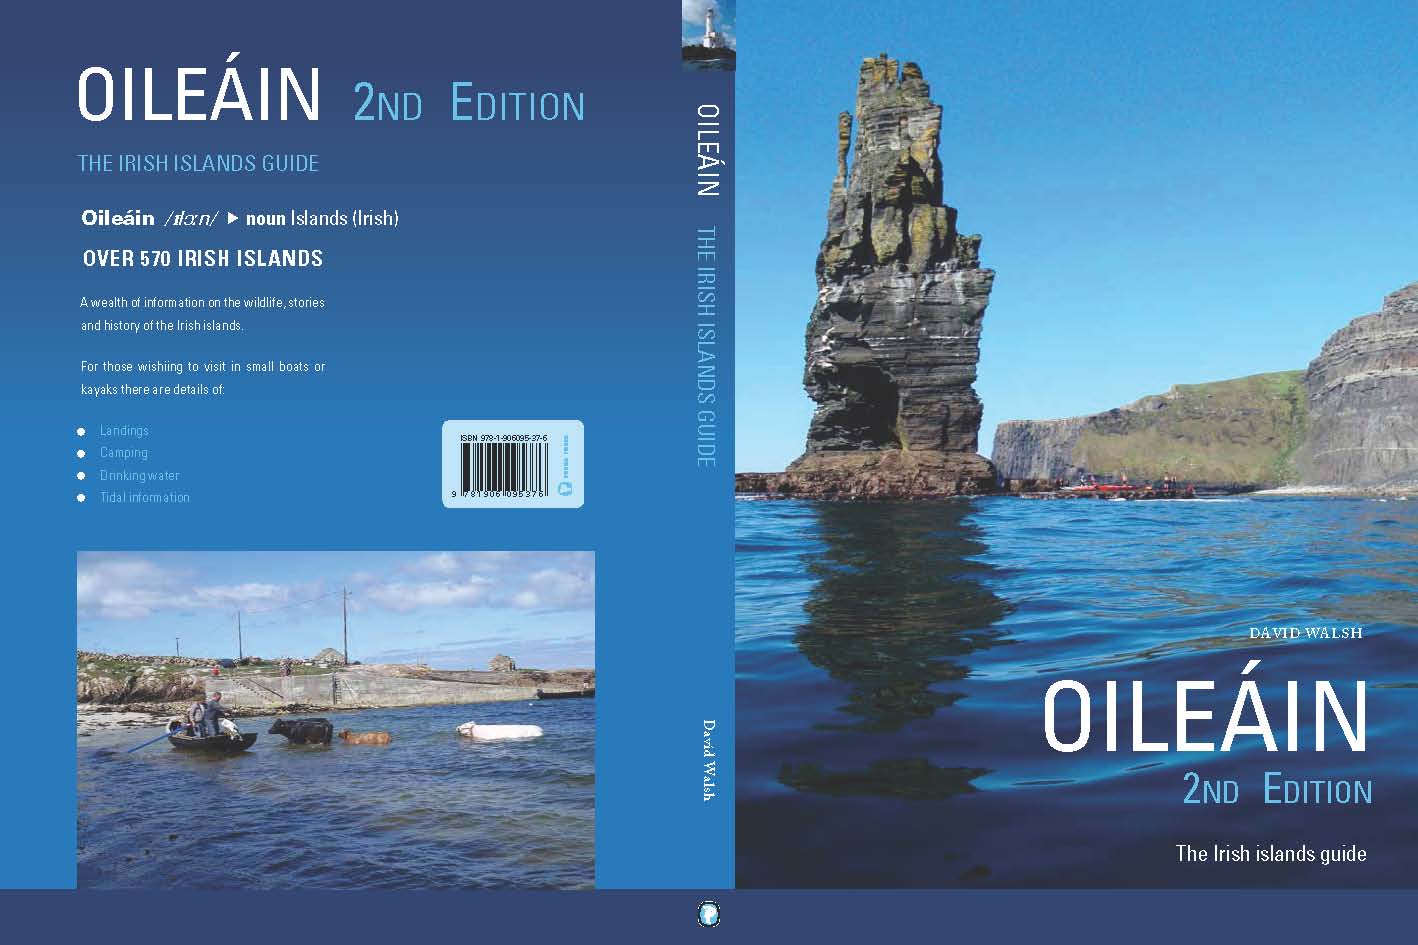 Oileain 2nd Edition Cover_Page_1.jpg